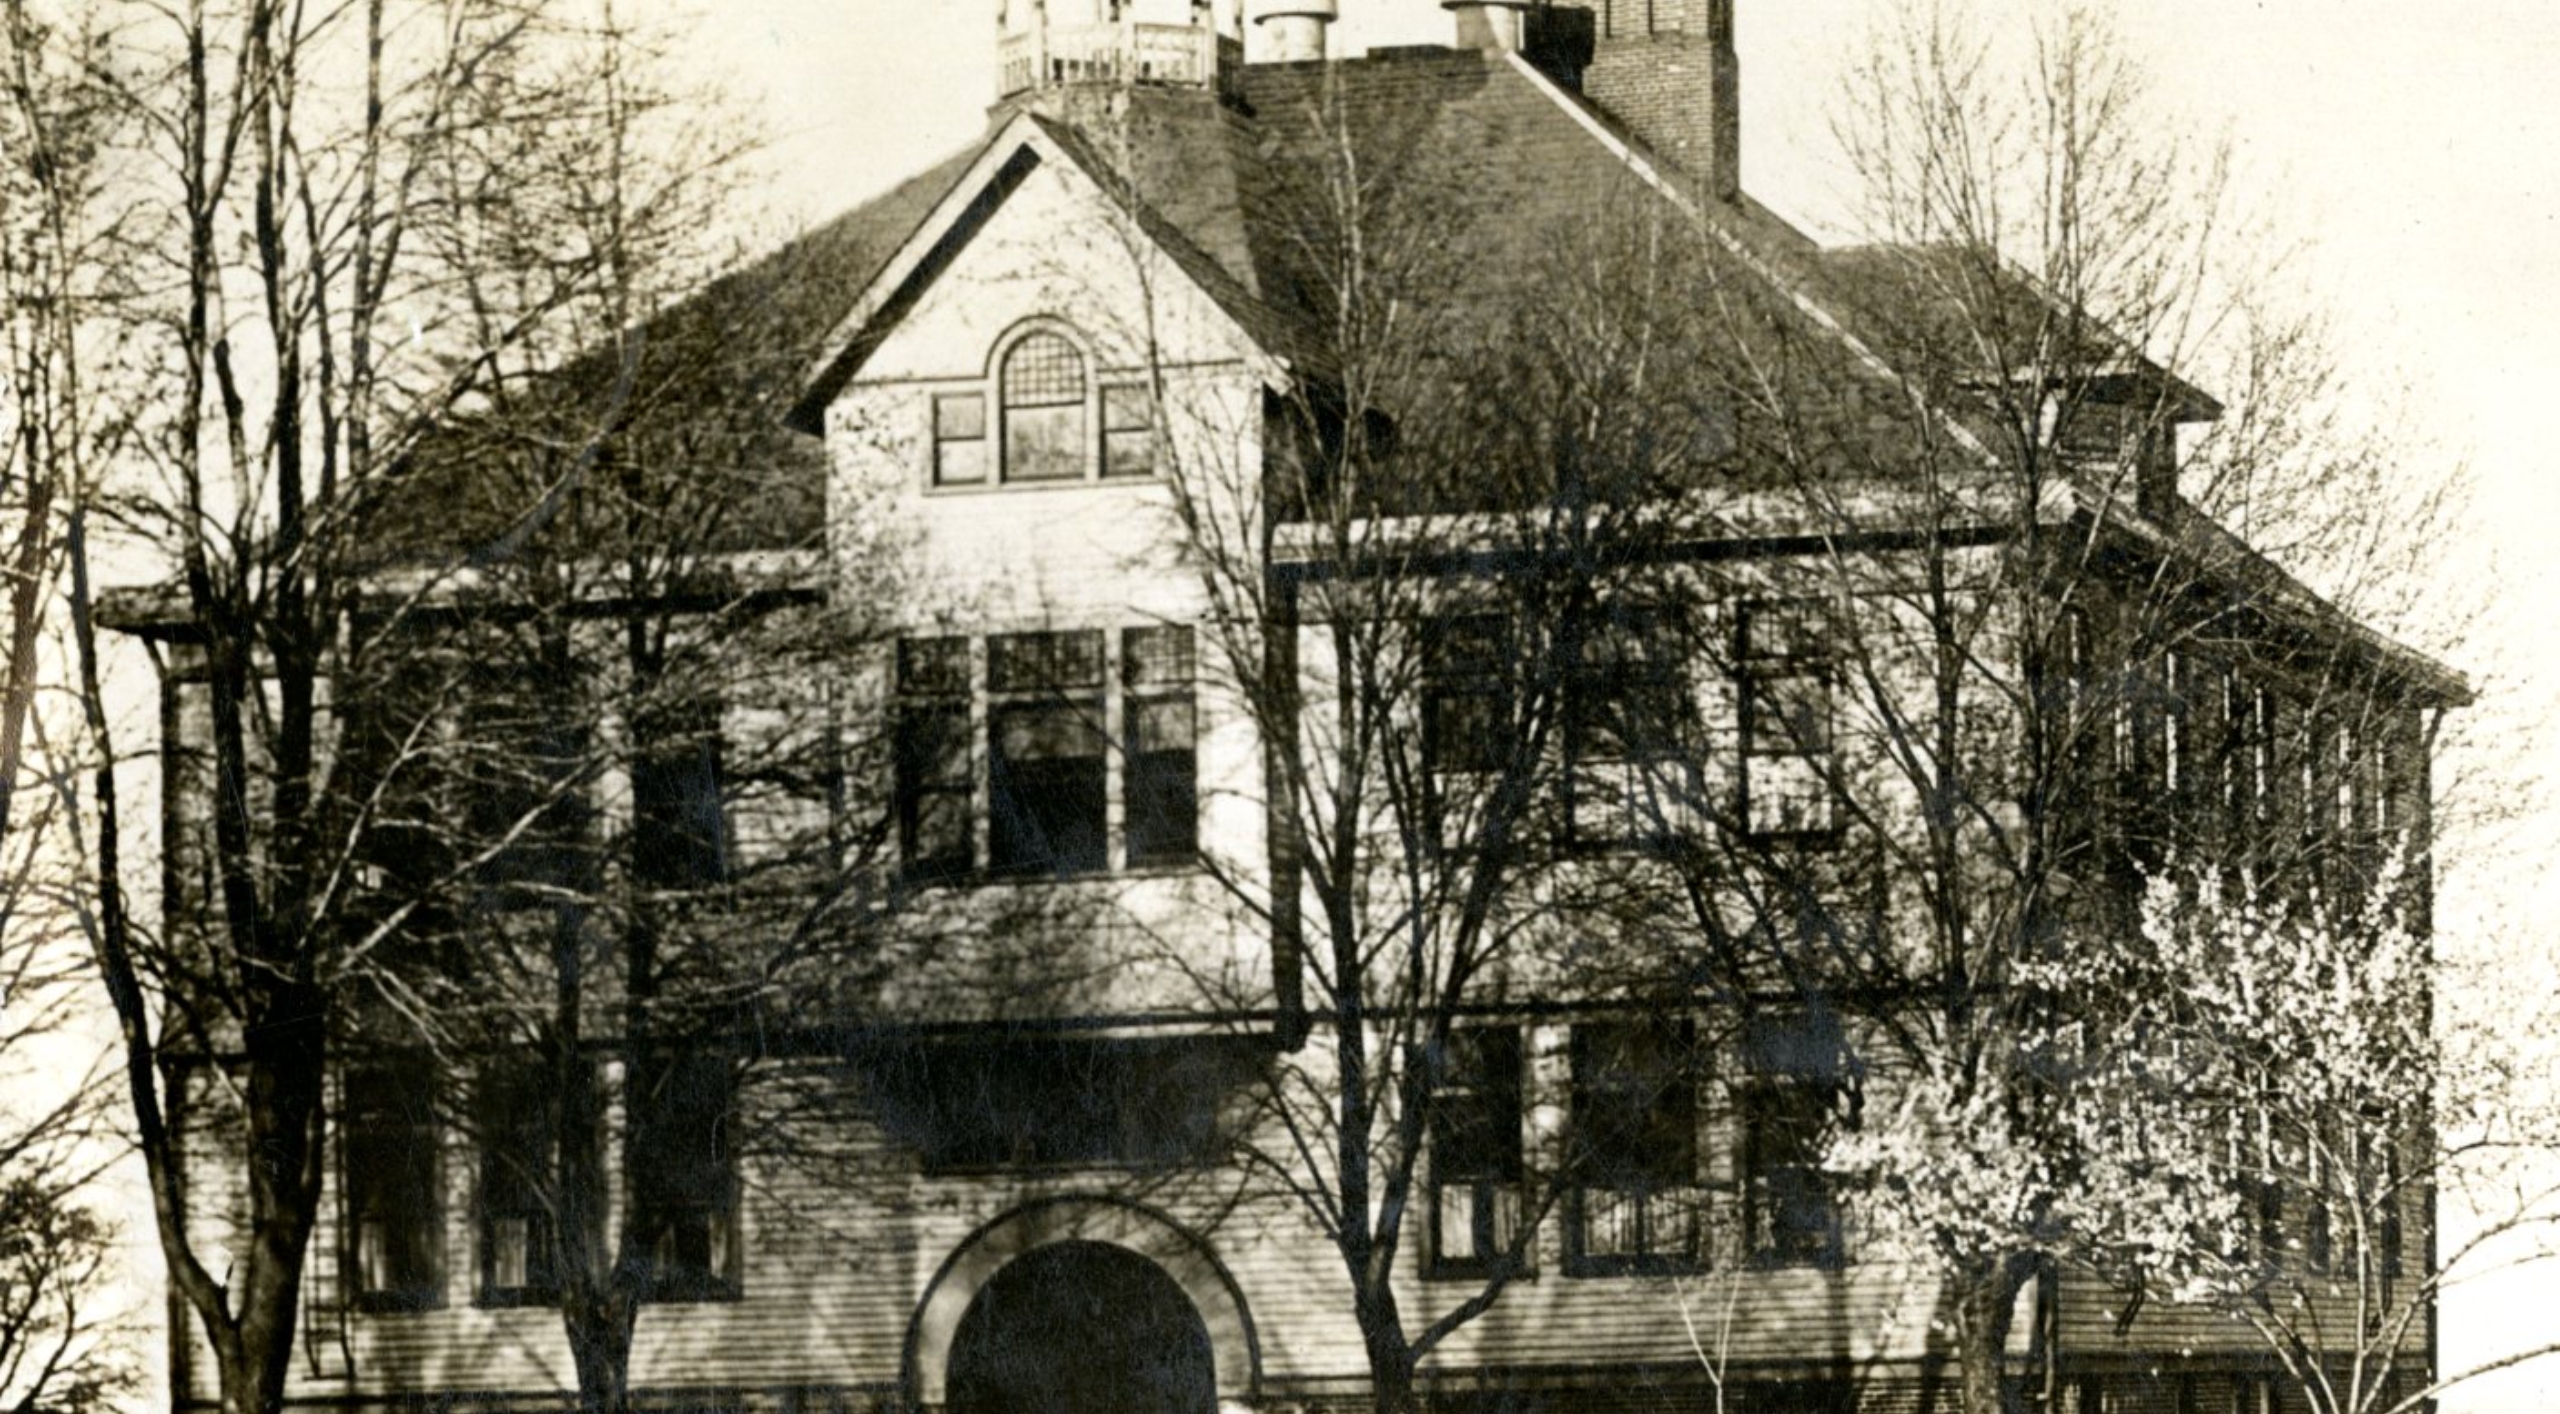 Once located in east Homer and built in 1890